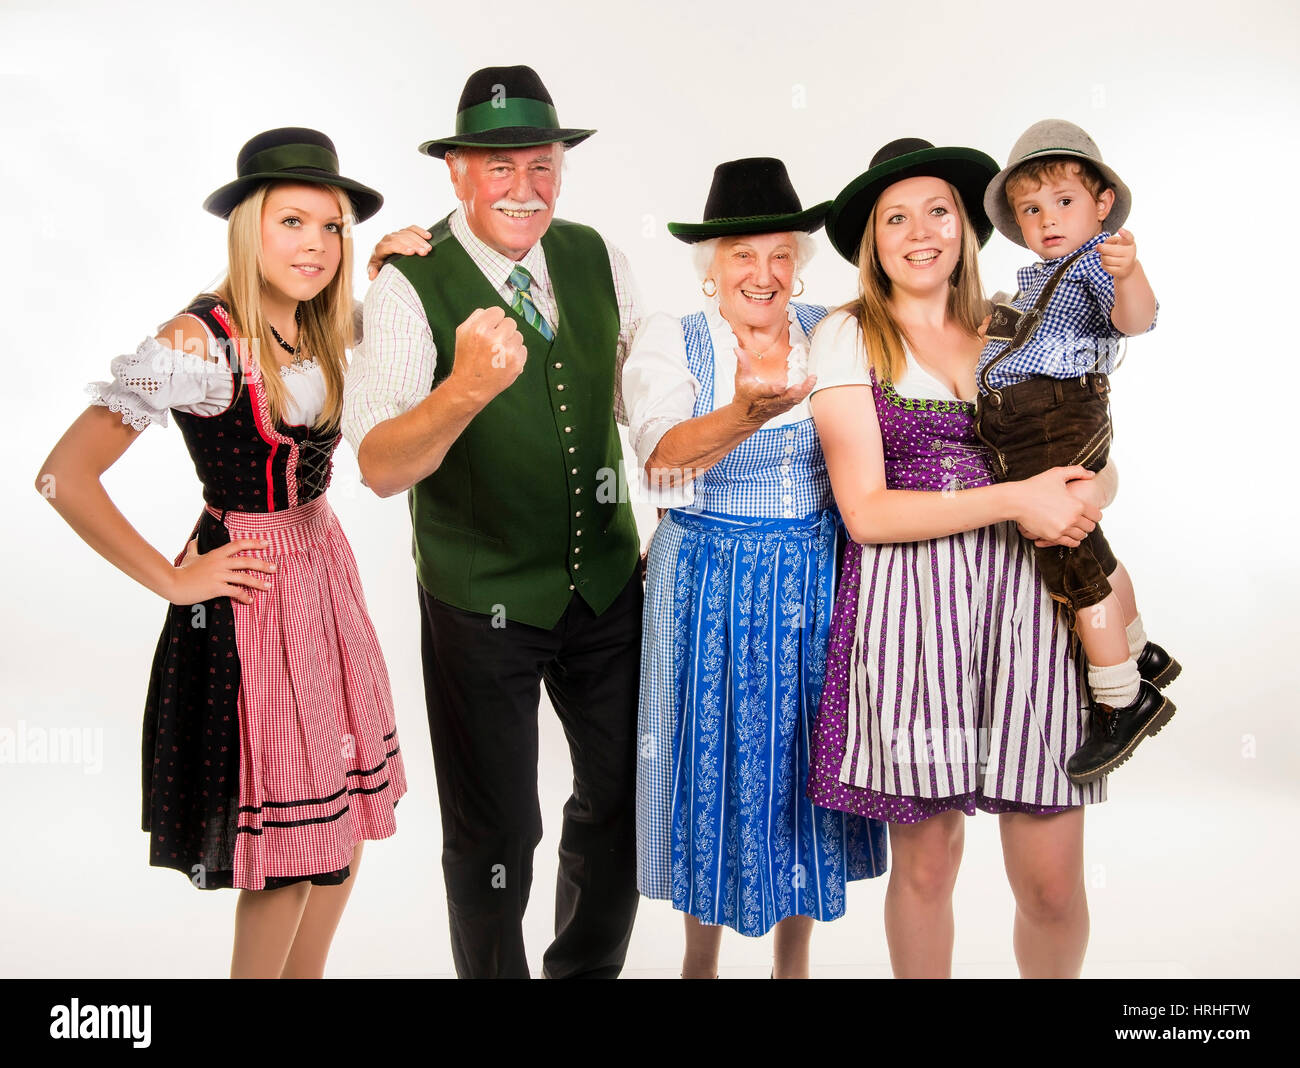 Jung und alt in Tracht - young and old in traditional costume Stock Photo